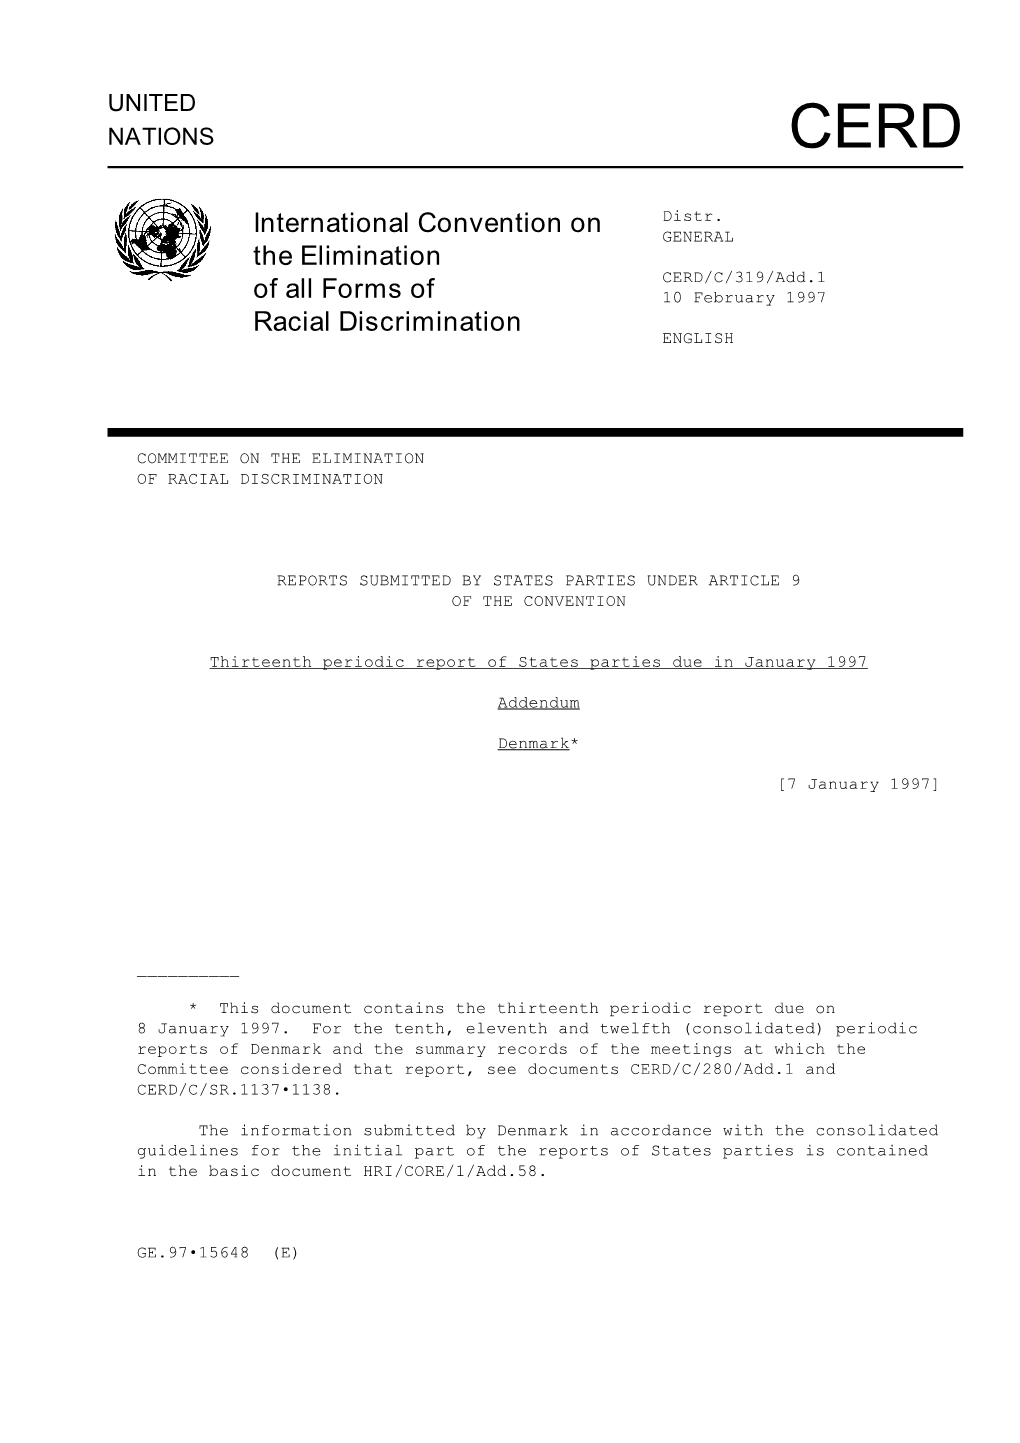 International Convention on the Elimination of All Forms of Racial Discrimination Which Entered Into Force with Respect to Denmark on 8 January 1972